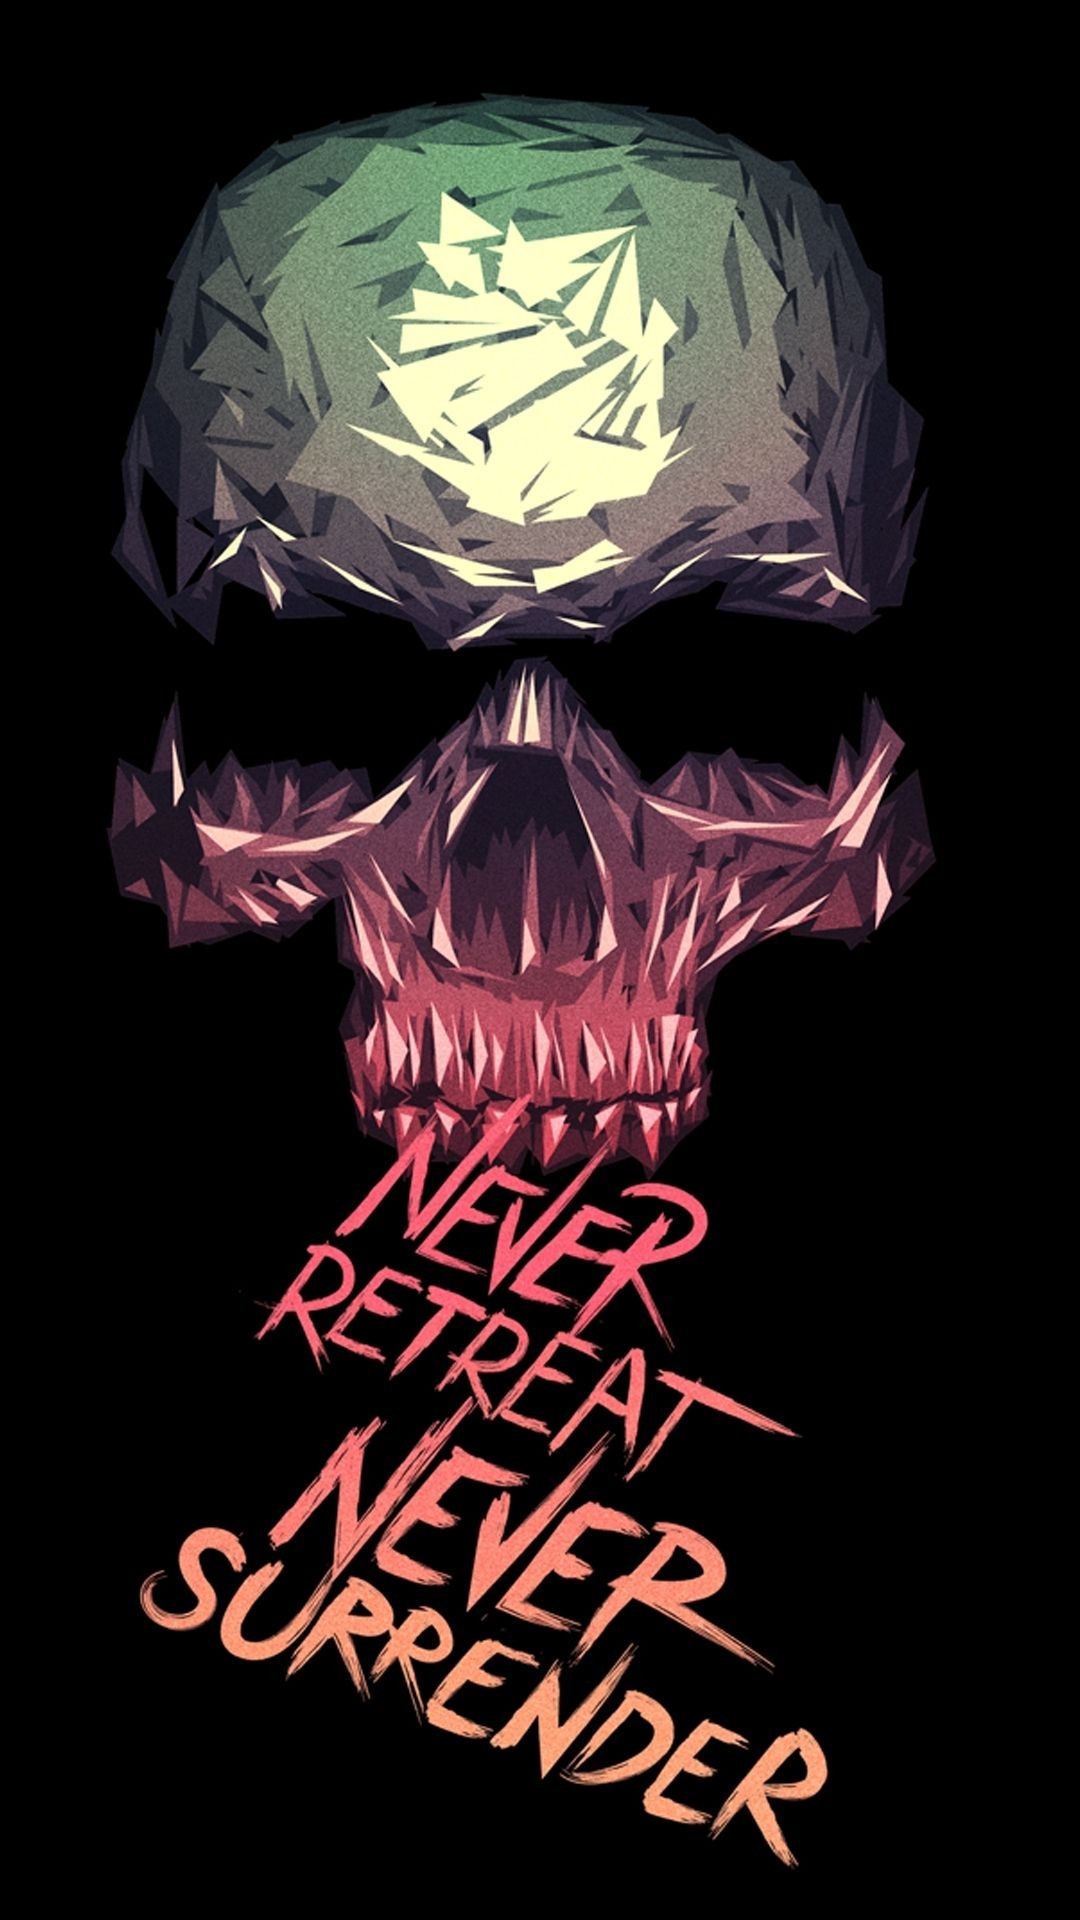 1080x1920 Iphone X Wallpaper Dope Lovely Never Retreat Surrender Tap To